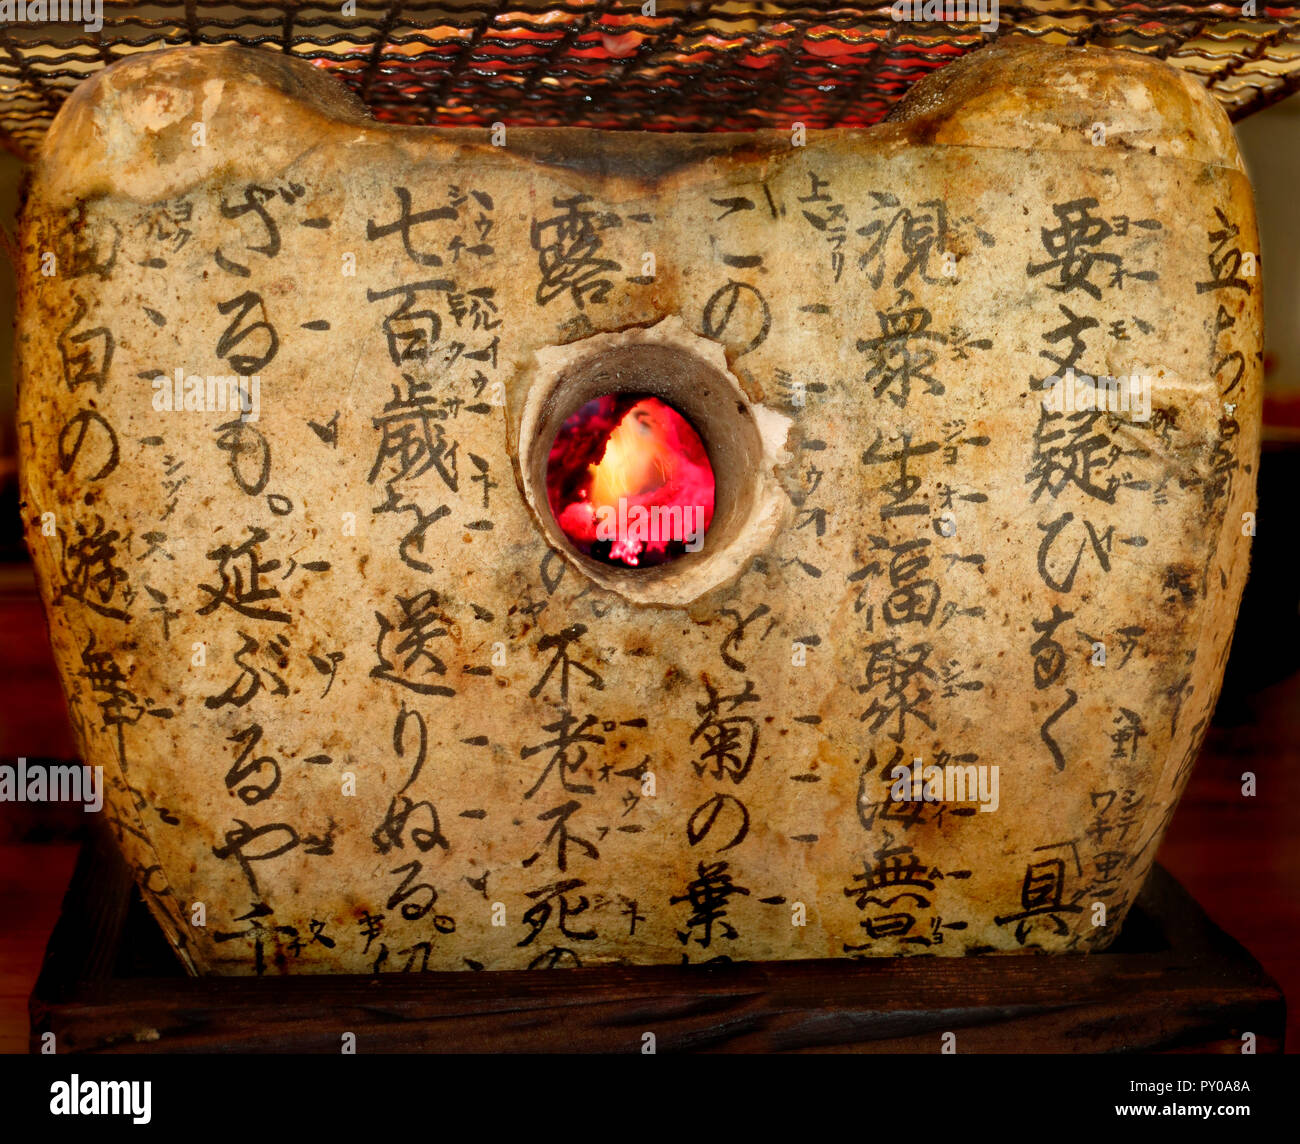 Steak on stone oven with inscriptions in Japanese restaurant, Tokyo, Japan Stock Photo